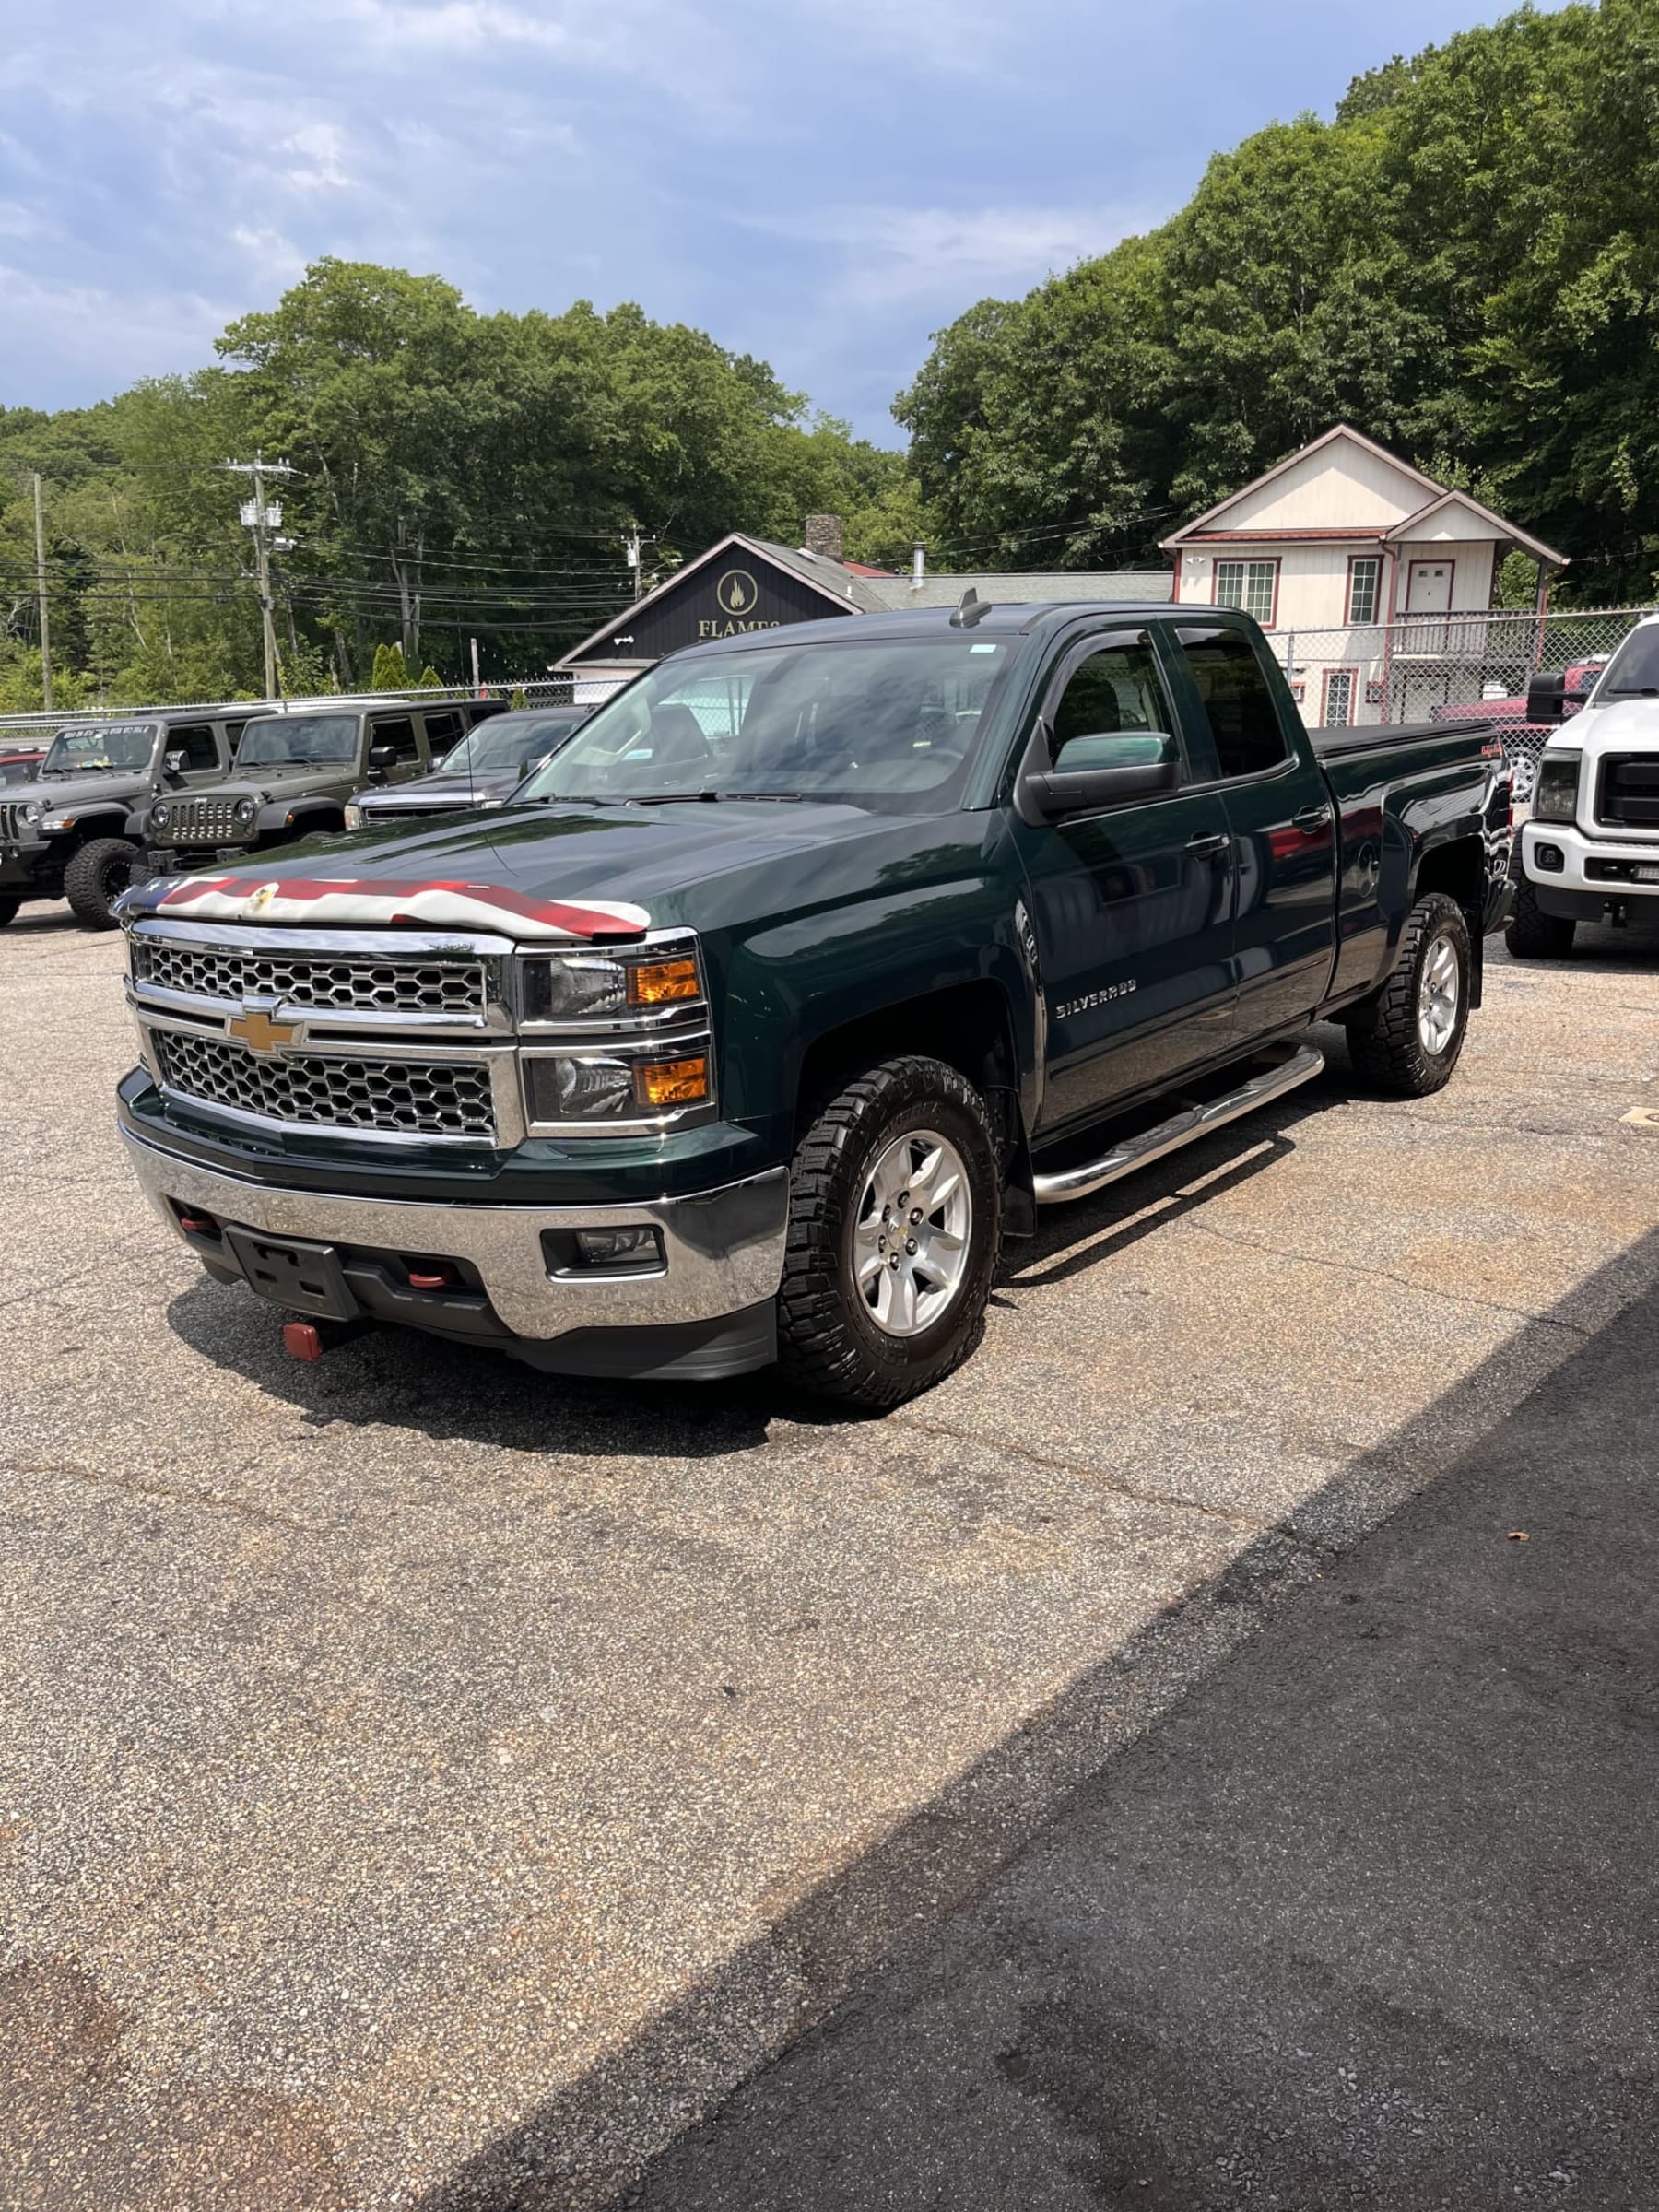 NEW ARRIVAL!! 2015 Chevrolet Silverado LT!! Cleanest one you will see! Runs and drives new! Remote Start, Backup Camera, Power heated seats, Bluetooth and much more! 94,800 miles!! Definitely won’t last at $19,900!!